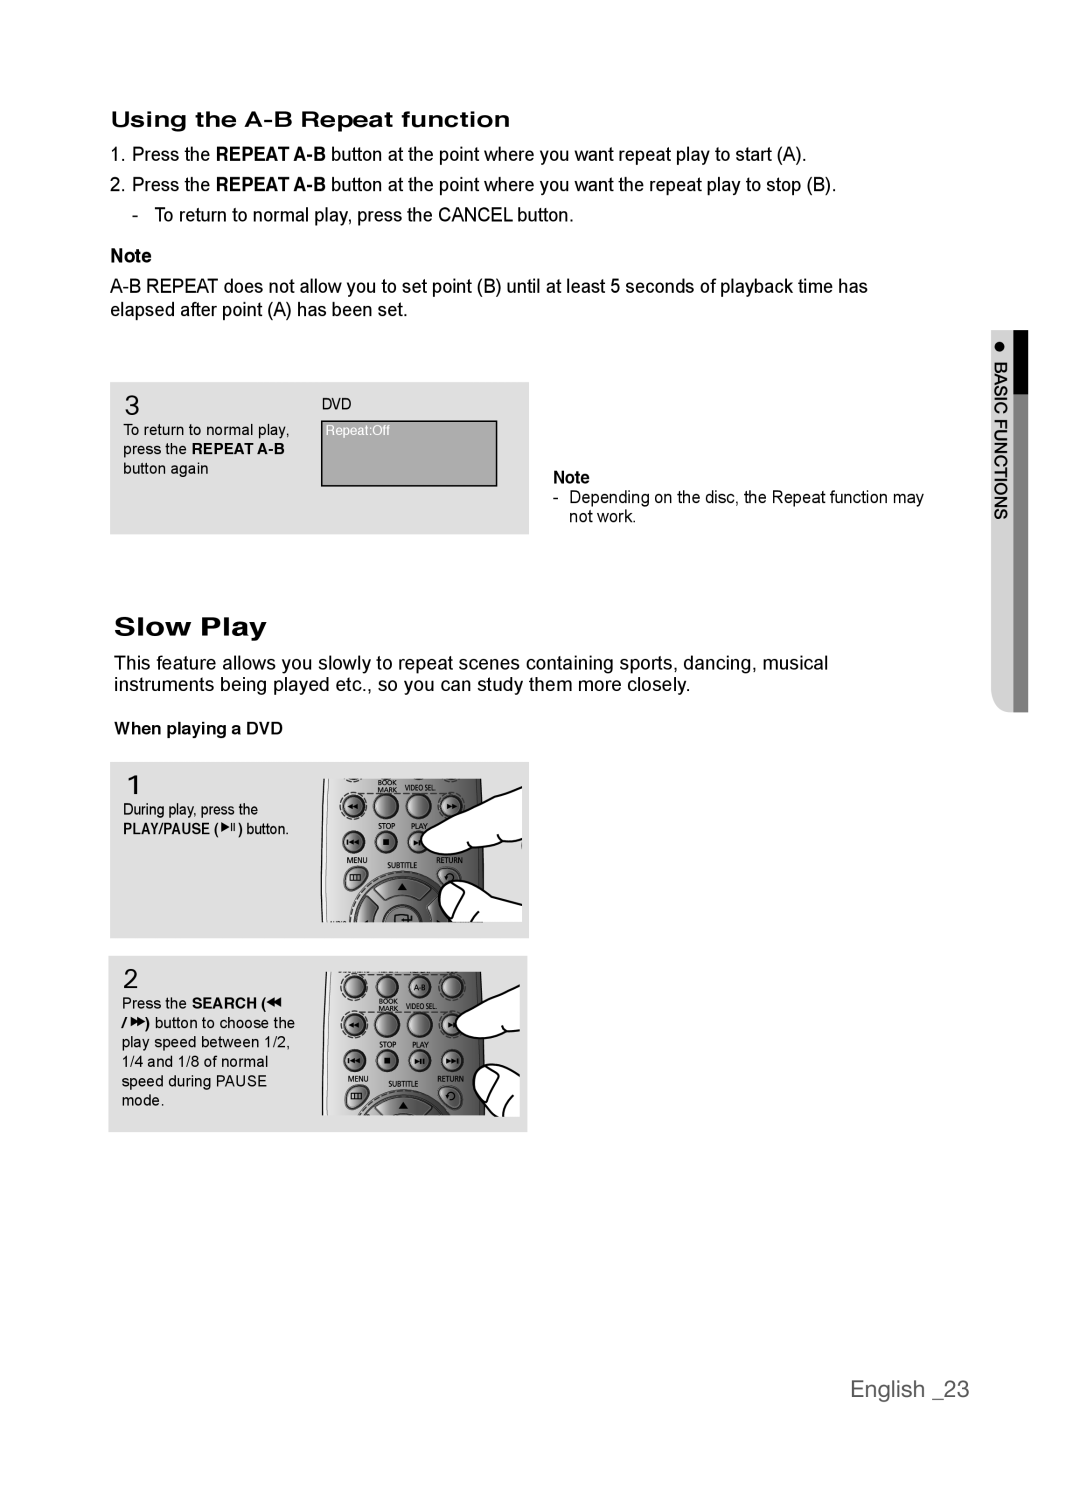 Samsung AK68-01770G, DVD-P390 user manual Slow Play, Using the A-B Repeat function, English 